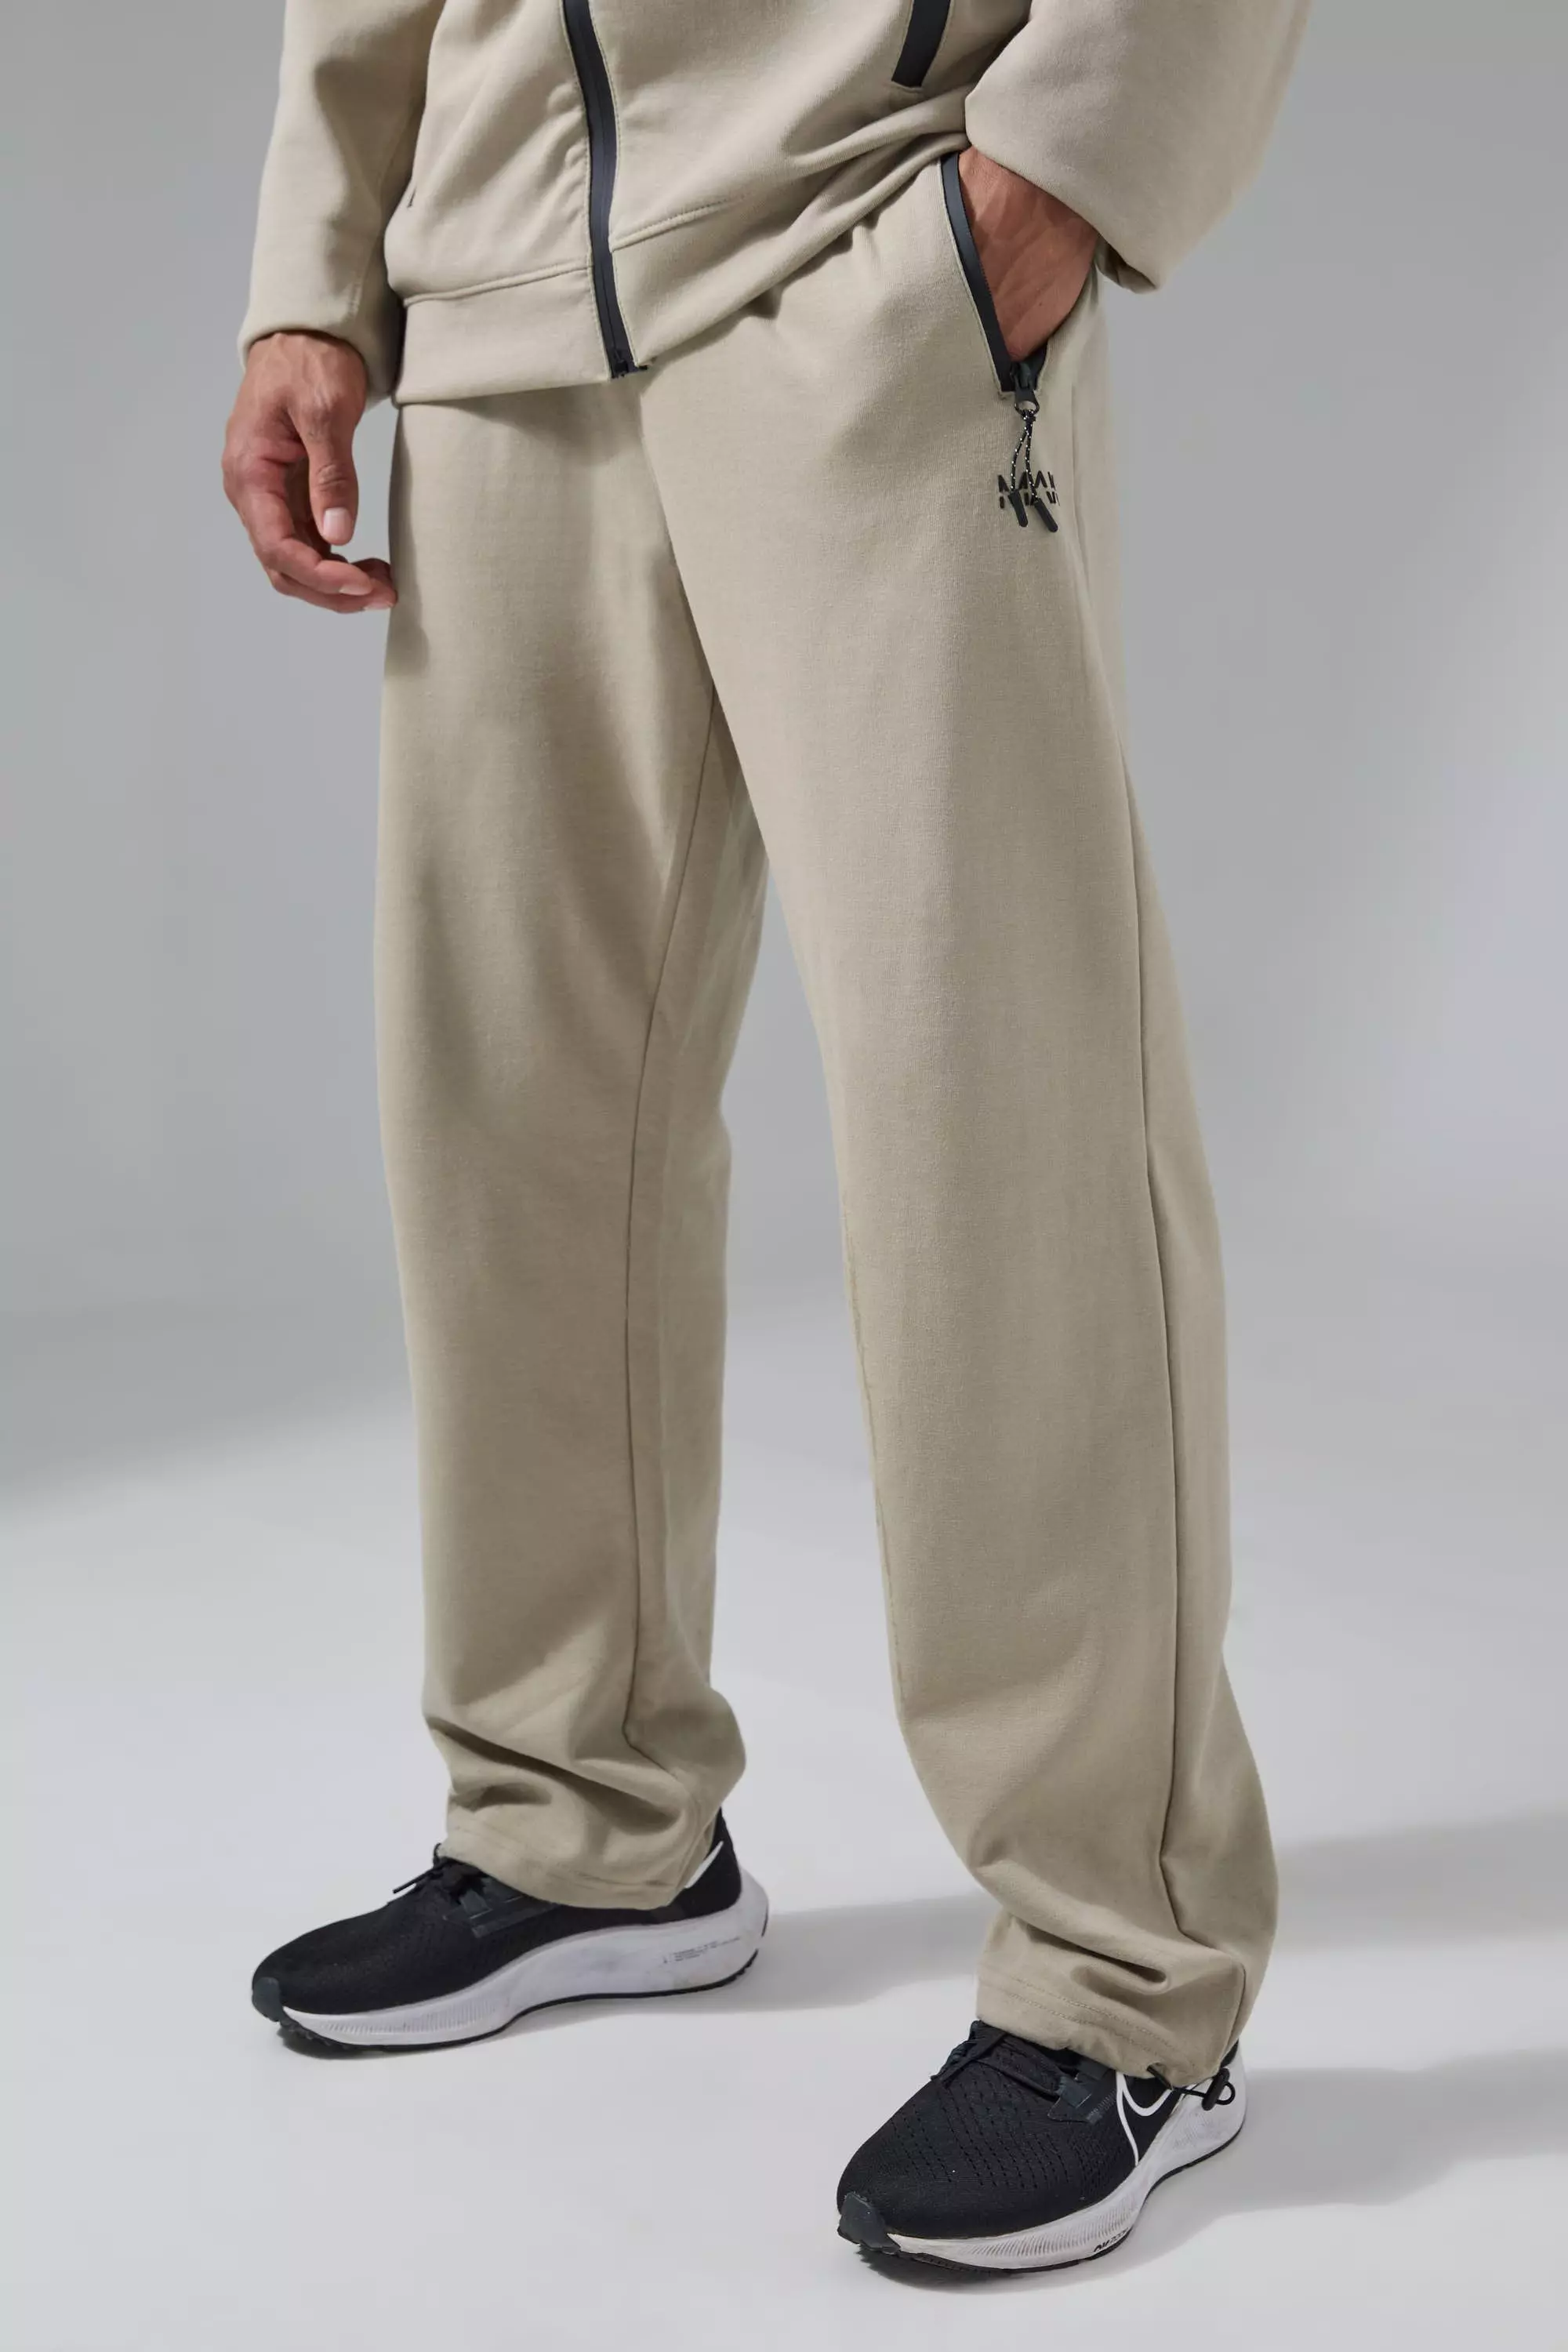 Everyday Active Slim Fit Pant